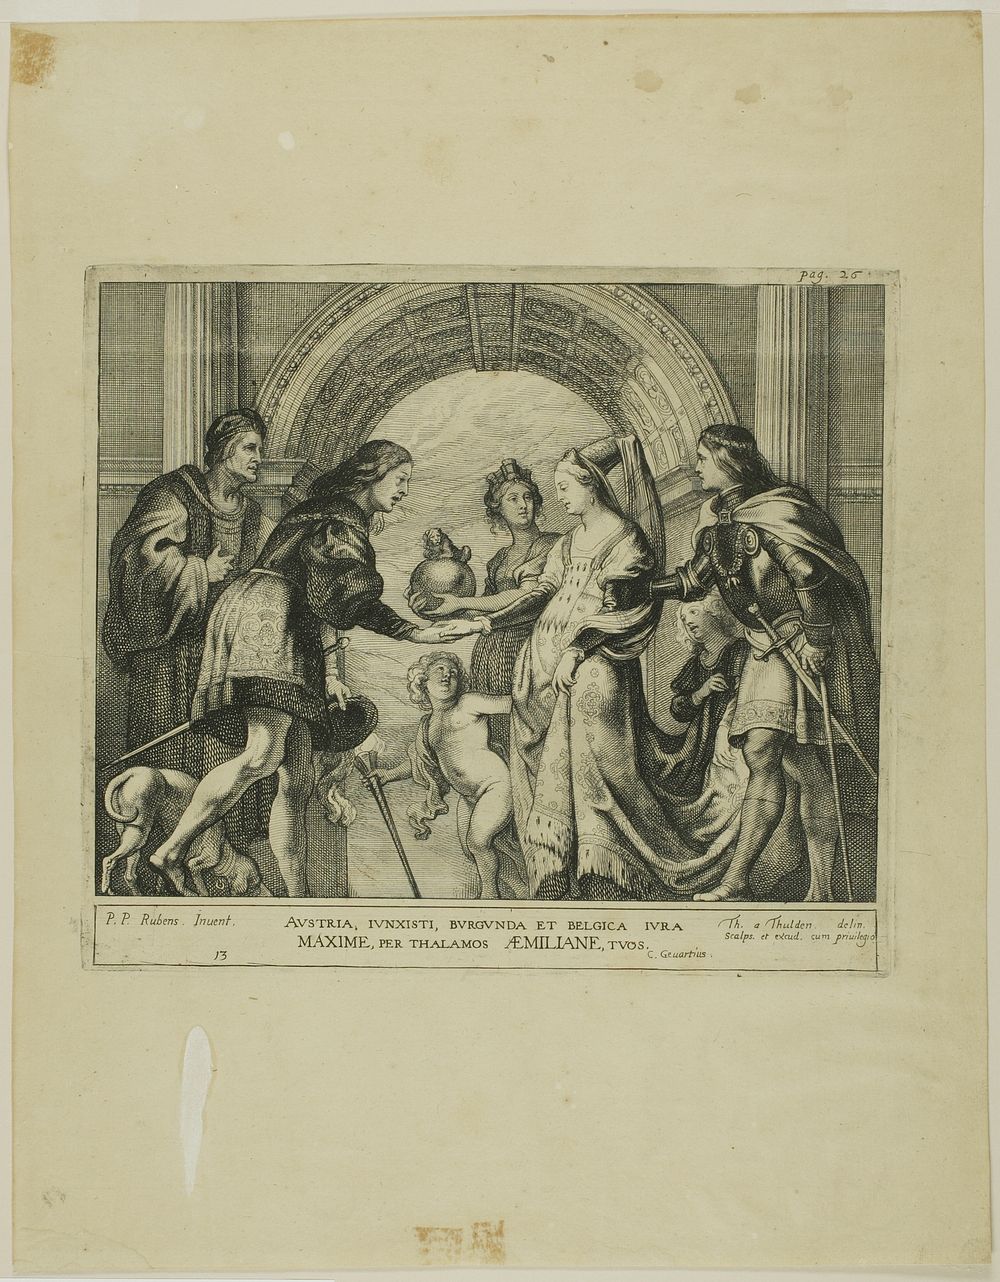 The Marriage of Maximilian of Austria with Mary of Burgundy by Theodoor van Thulden